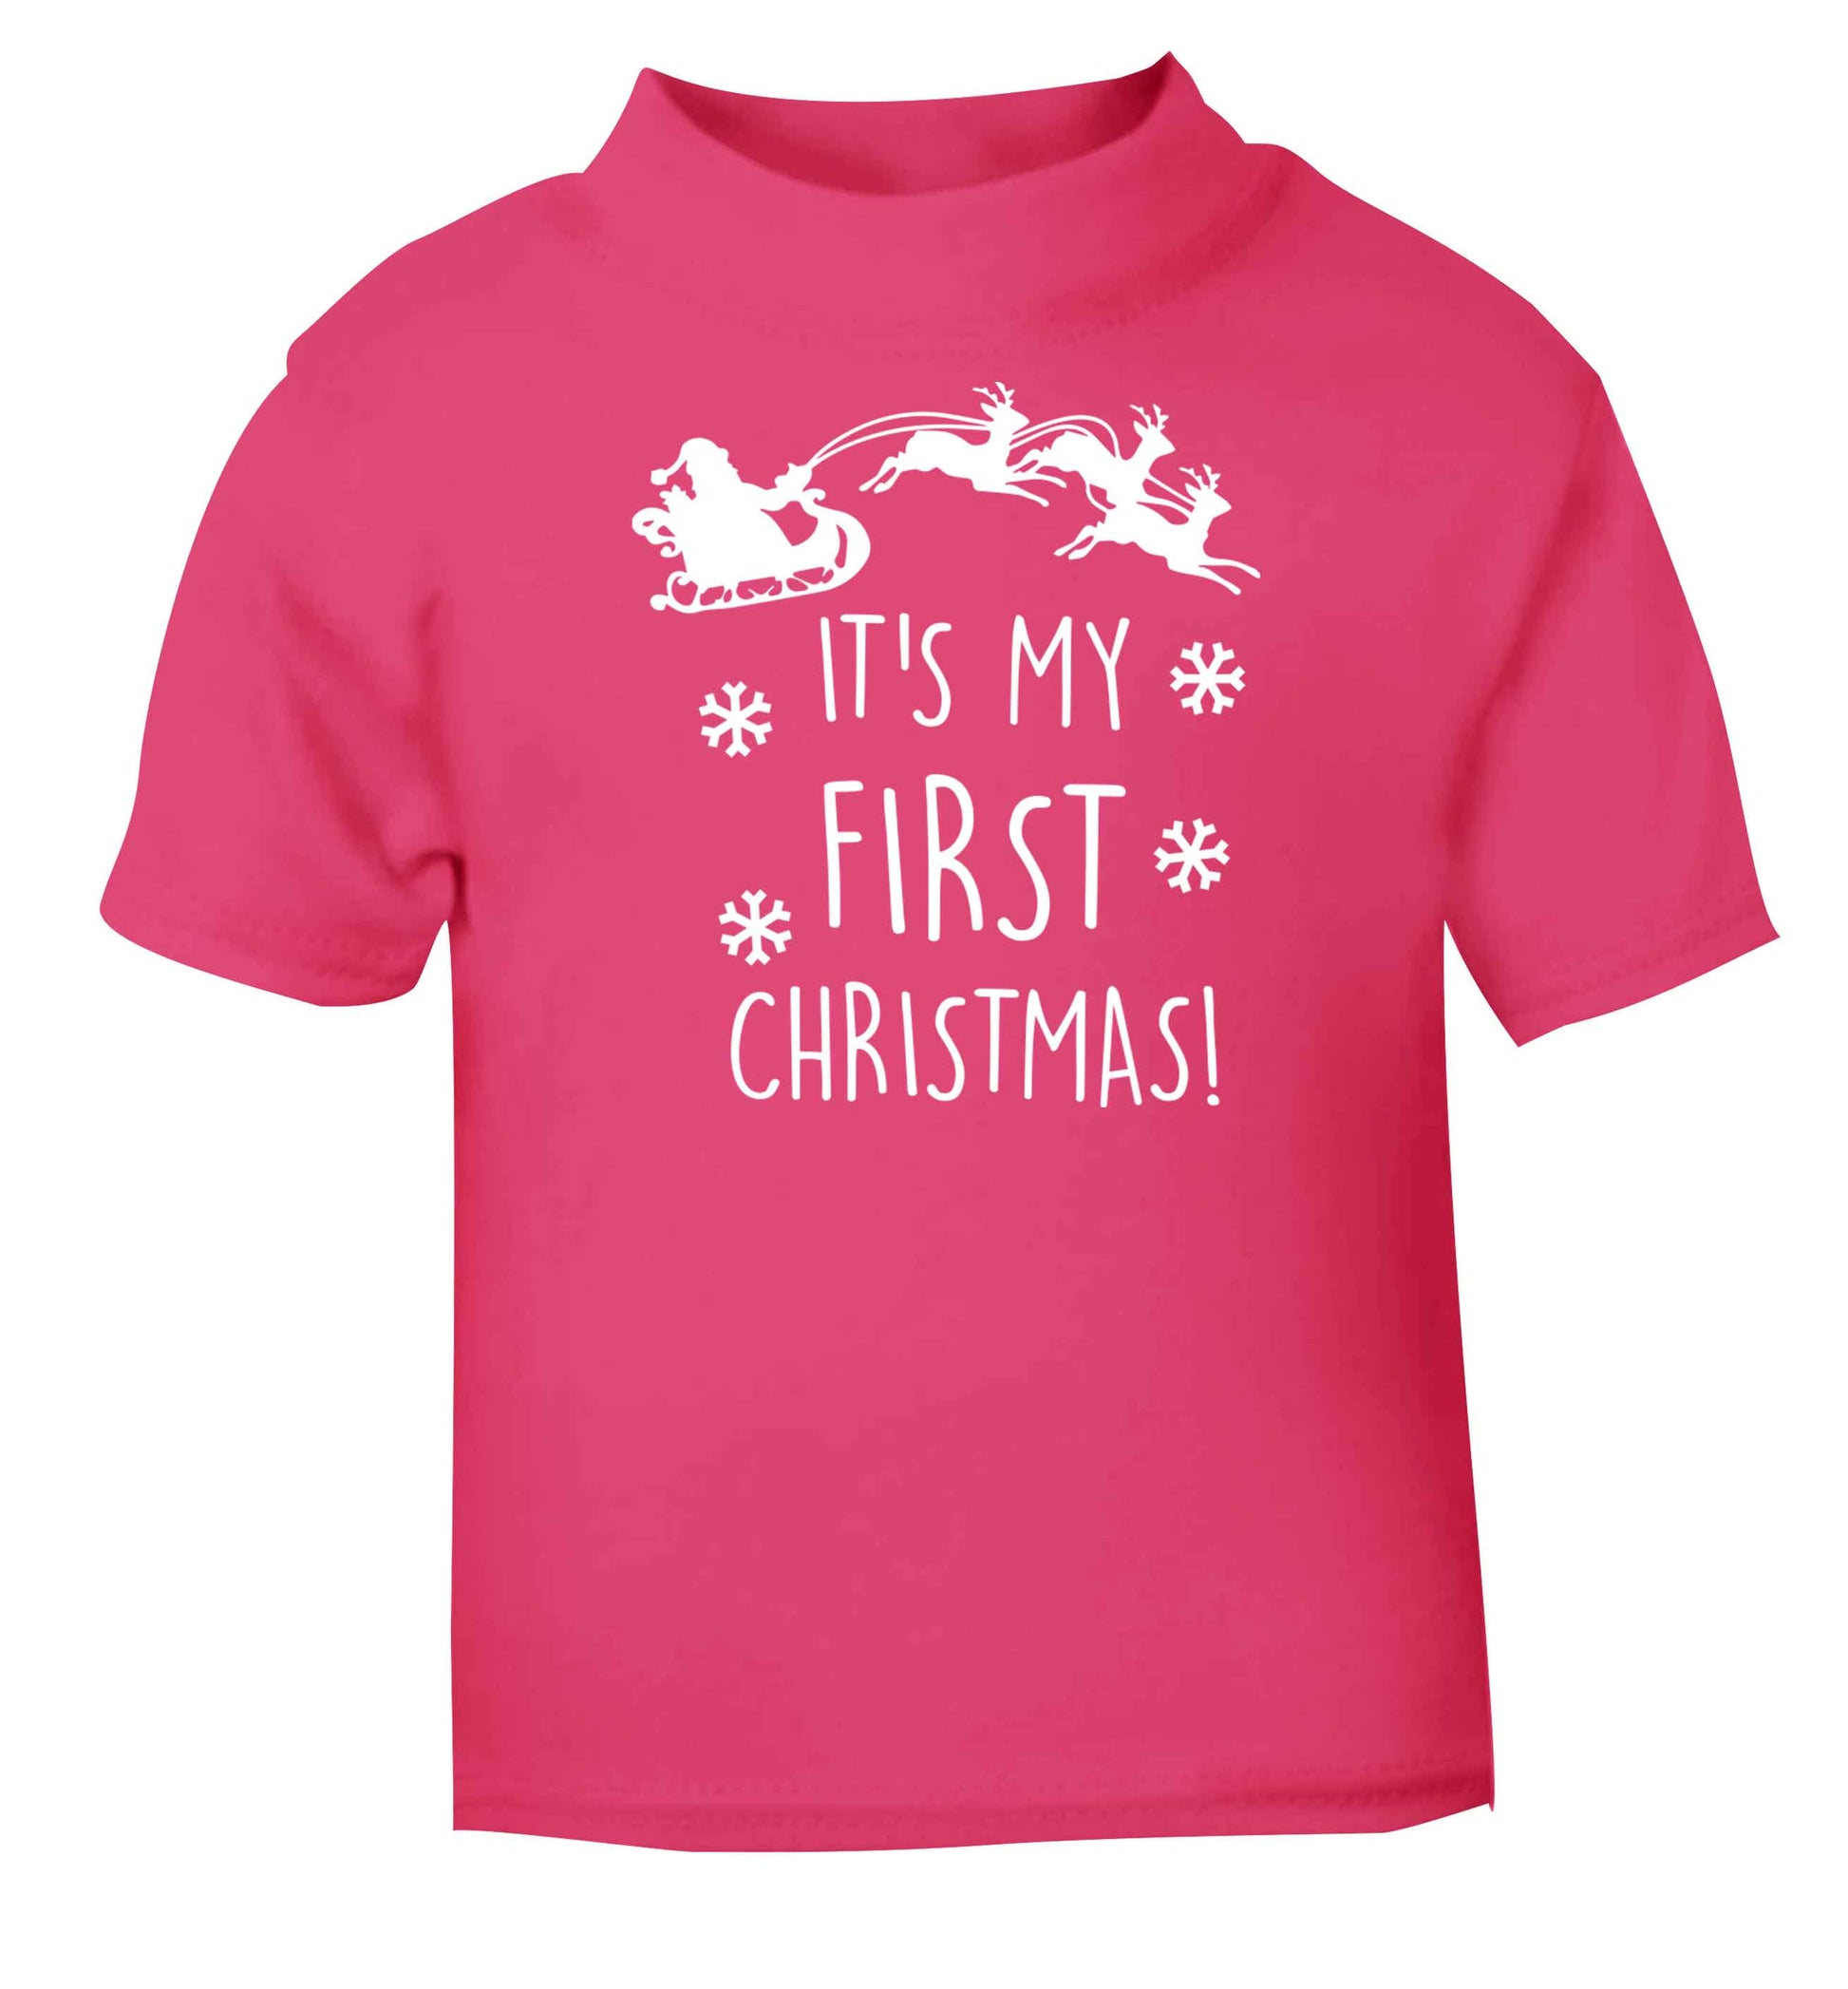 It's my first Christmas - Santa sleigh text pink baby toddler Tshirt 2 Years